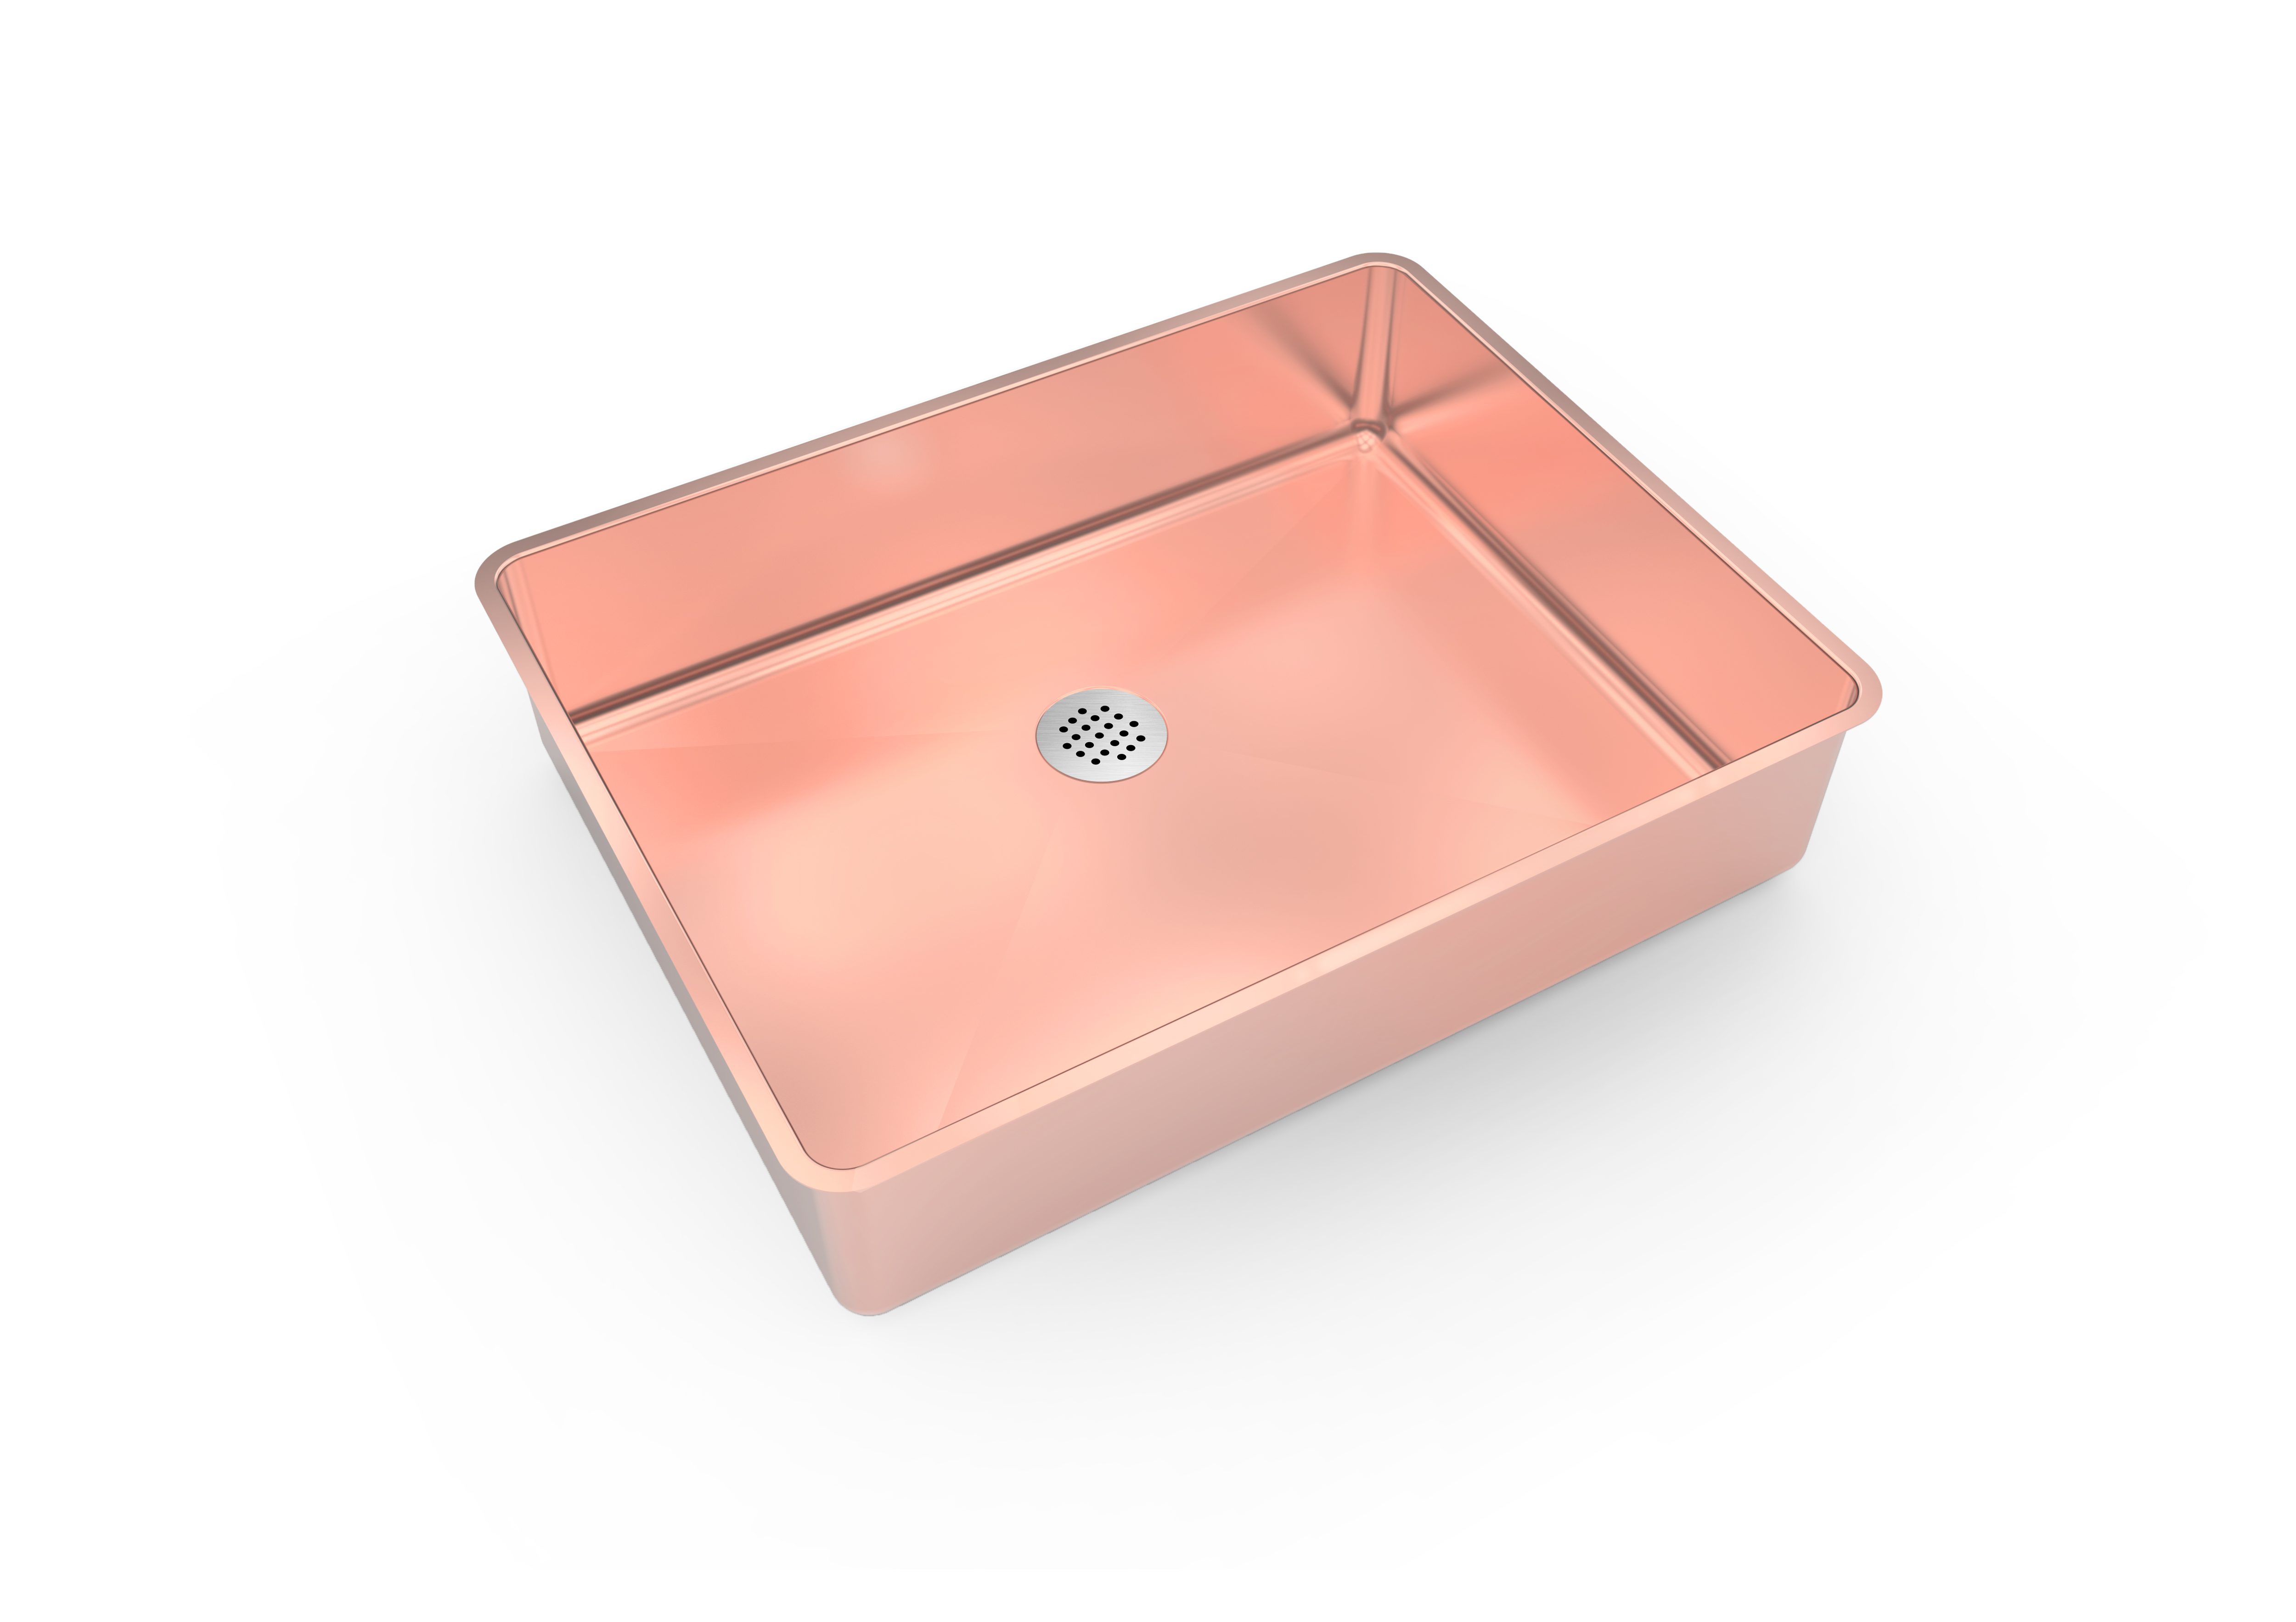 Nortrends Stainless Steel Handmade Undermont Sink Size: 480×370 mm - Rose Gold RR4837-YA ROSE GOLD